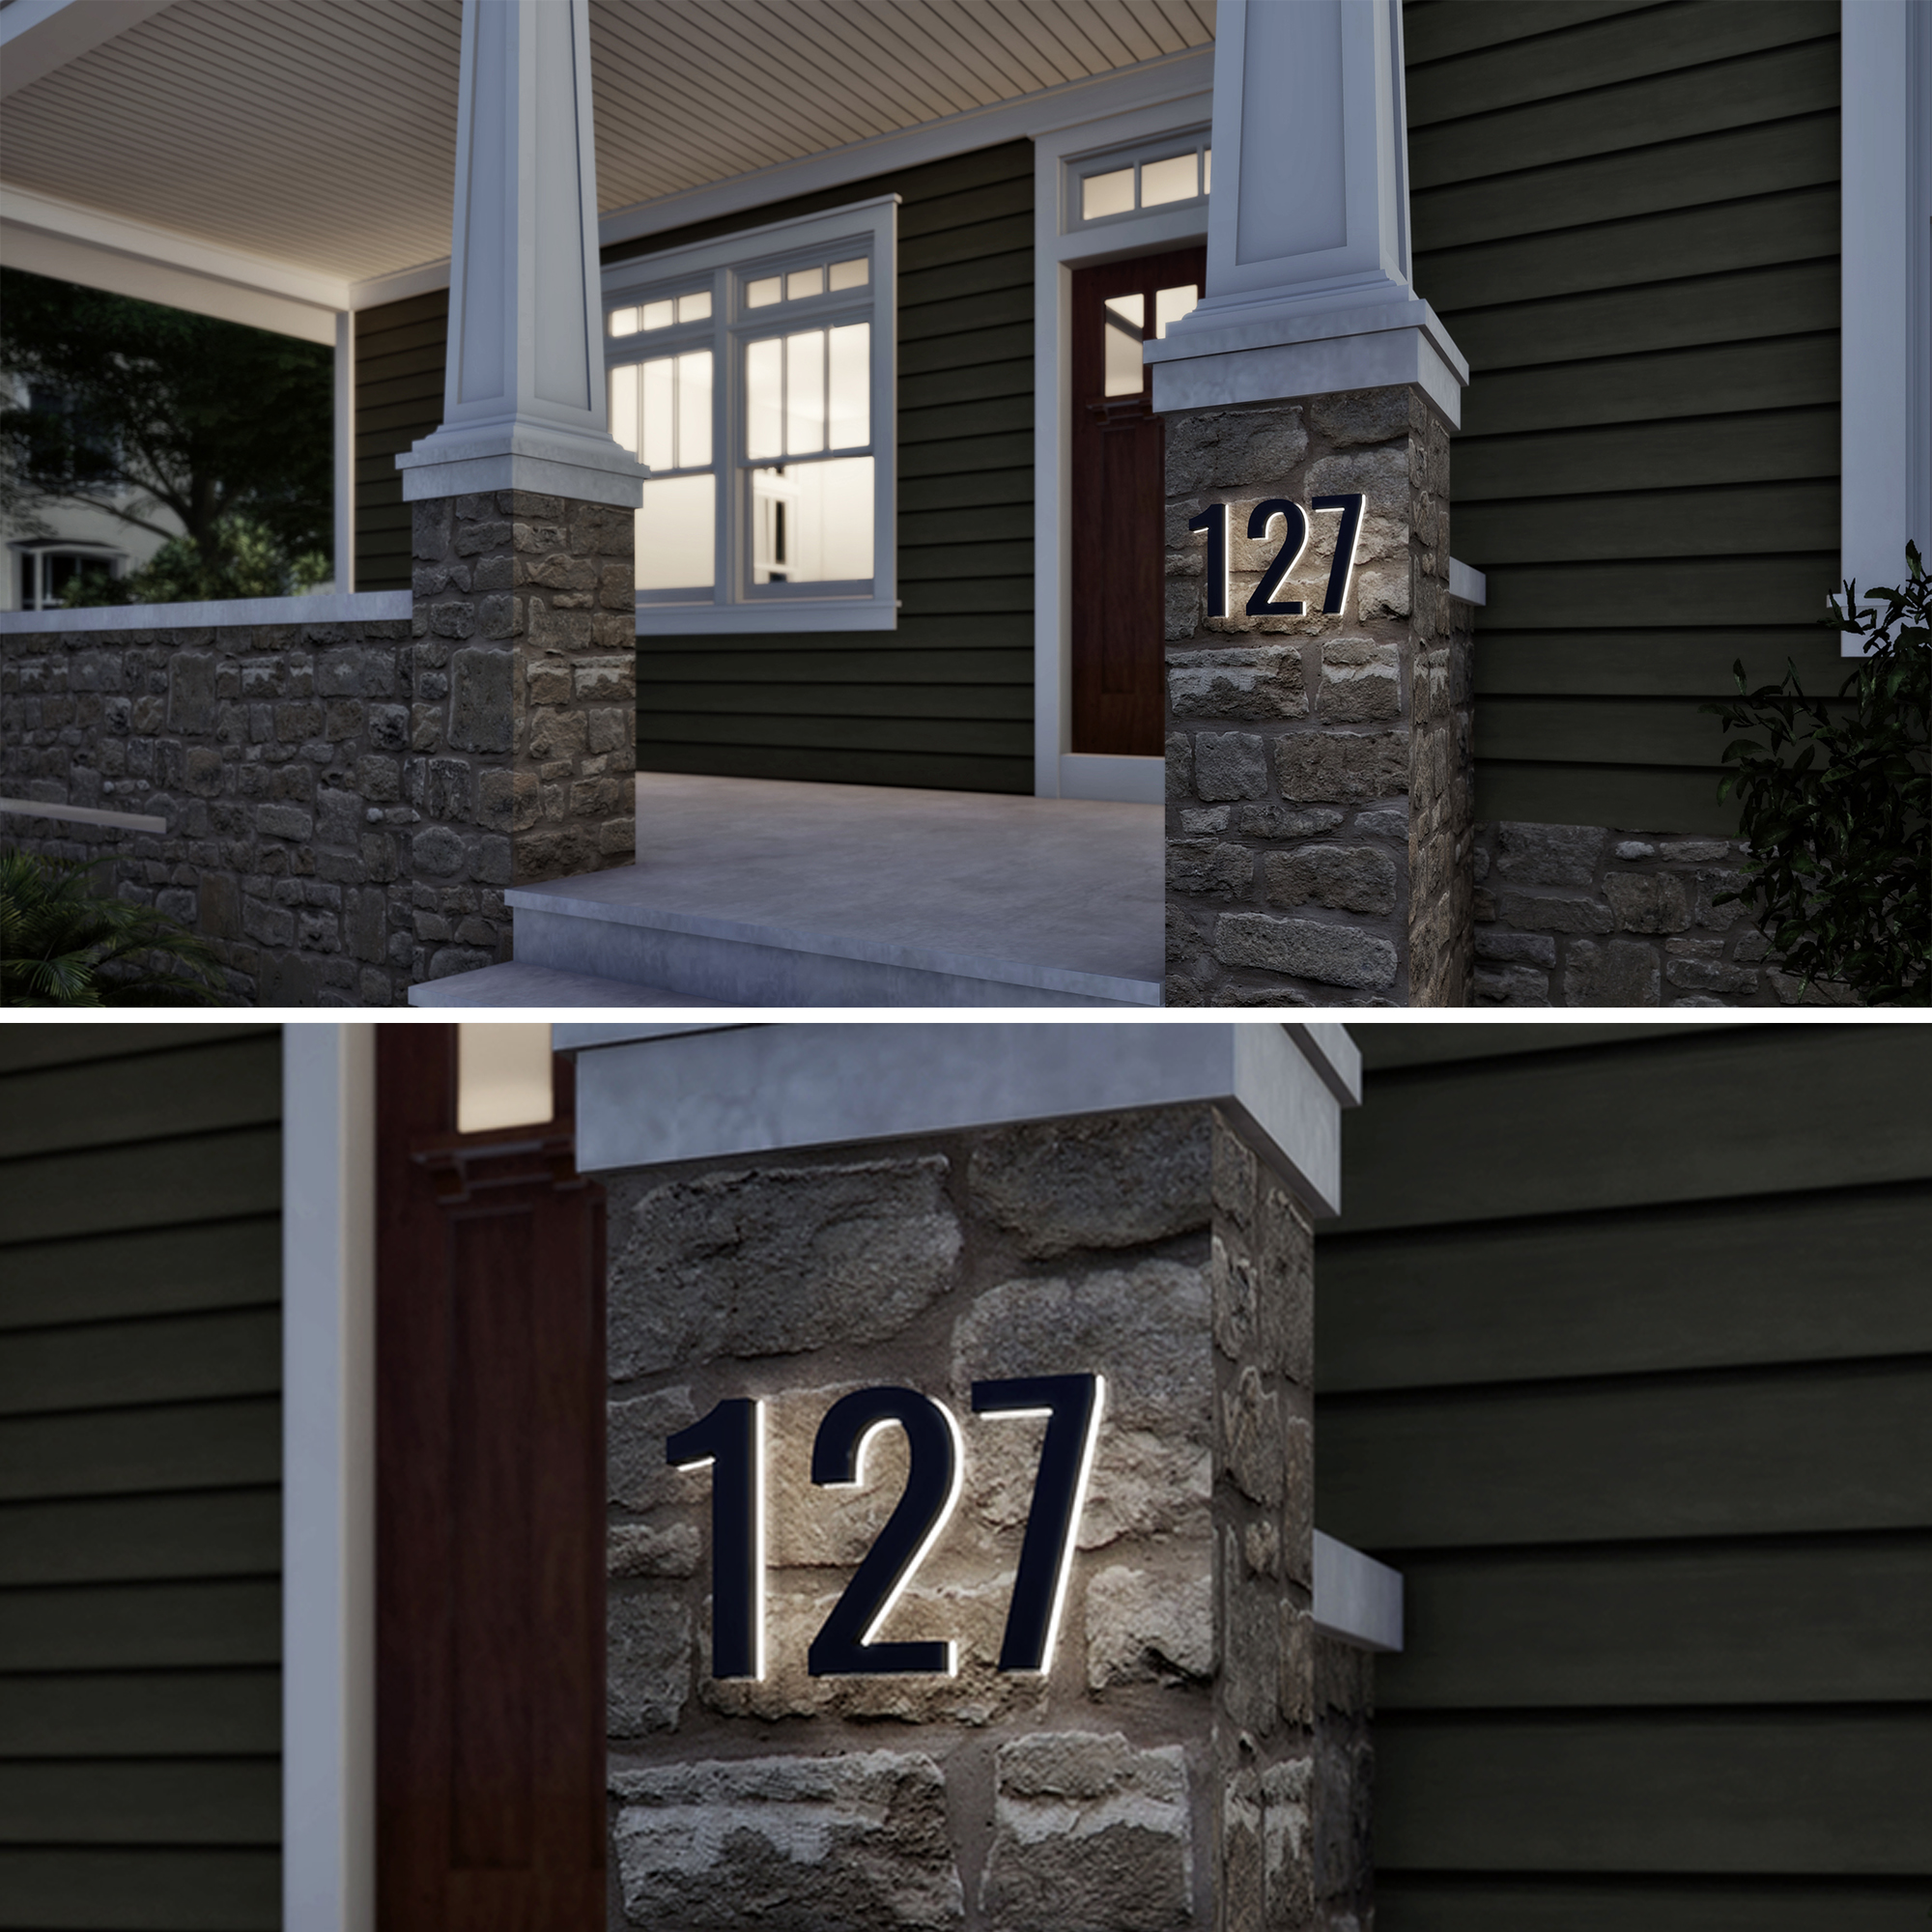 LumaNumbers Low-Voltage LED Address Numbers, Durable ABS-Polymer Lighted House Numbers, 5-inch, Weather-Proof, Illuminated (Black, 0) Power Source Required, Back-plate Recommended - image 3 of 5